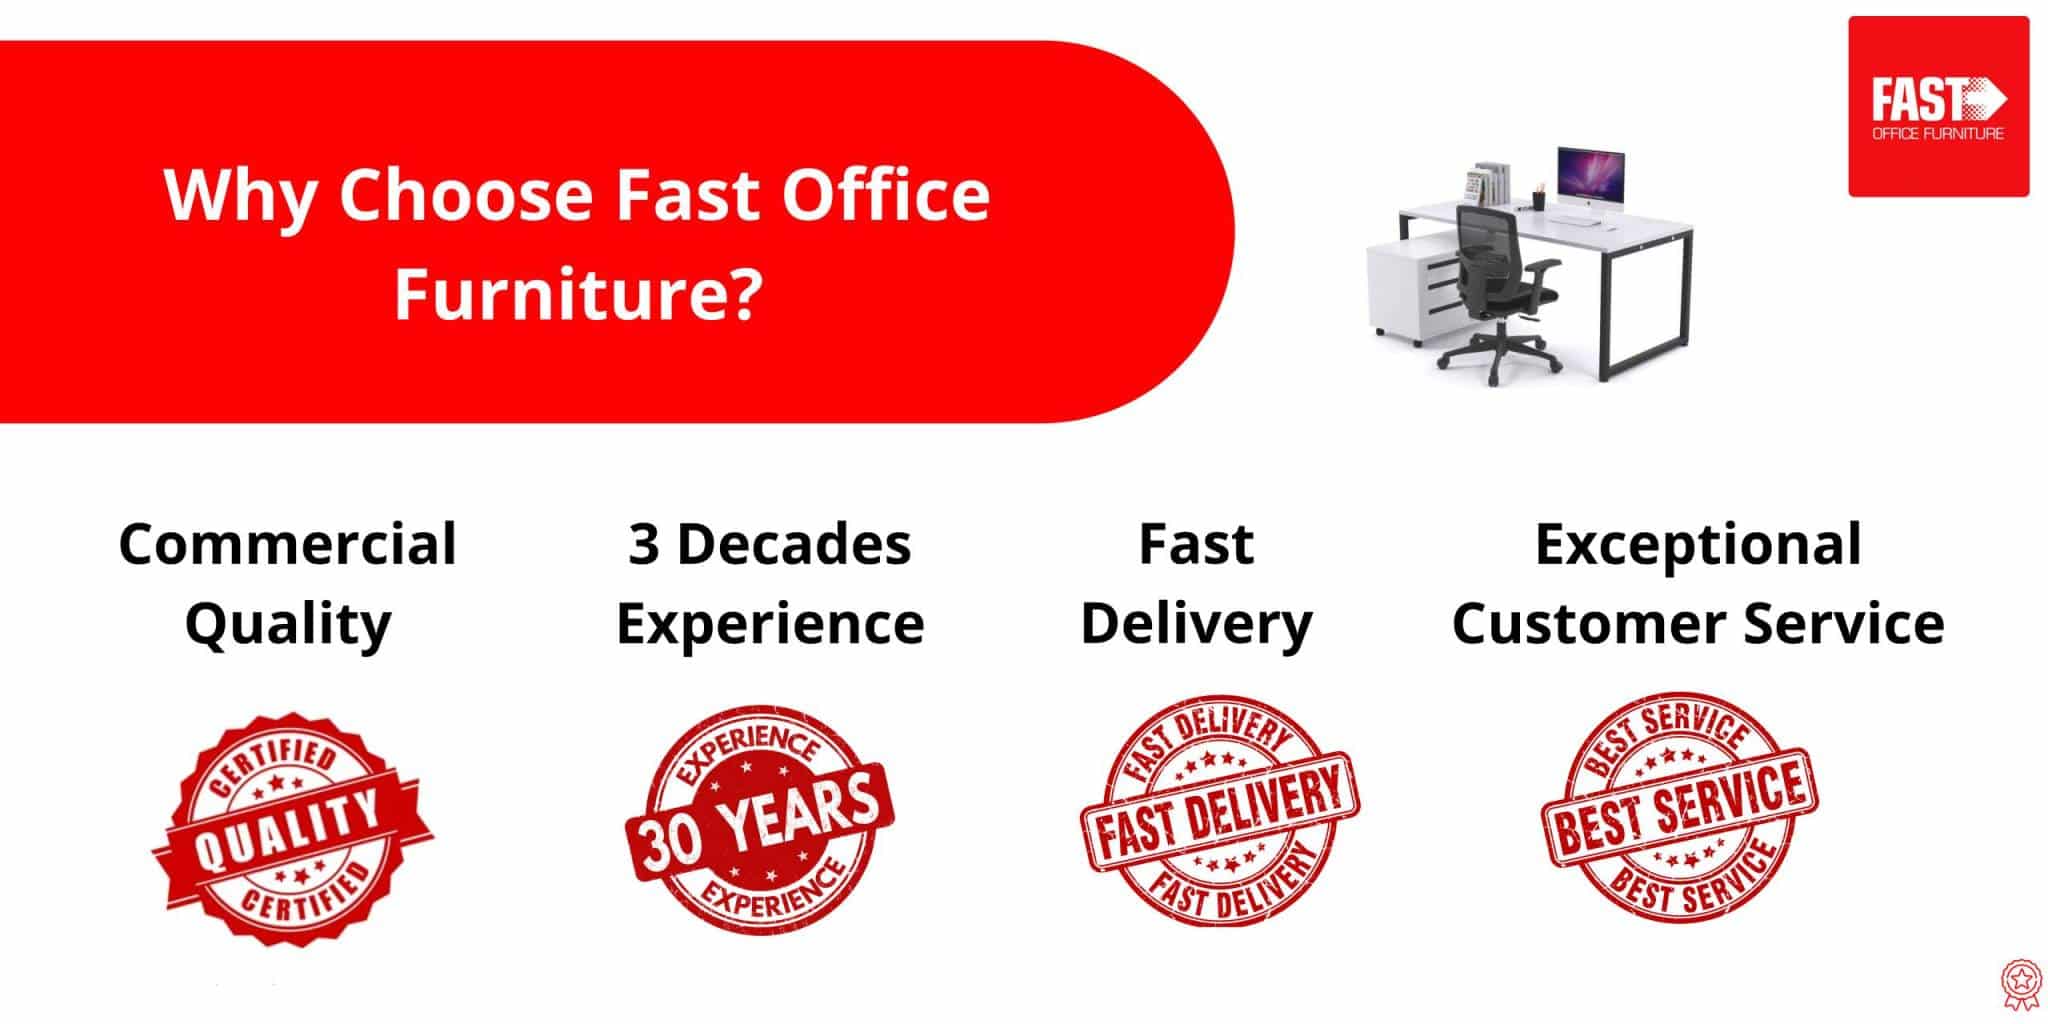 Why Choose Fast Office Furniture